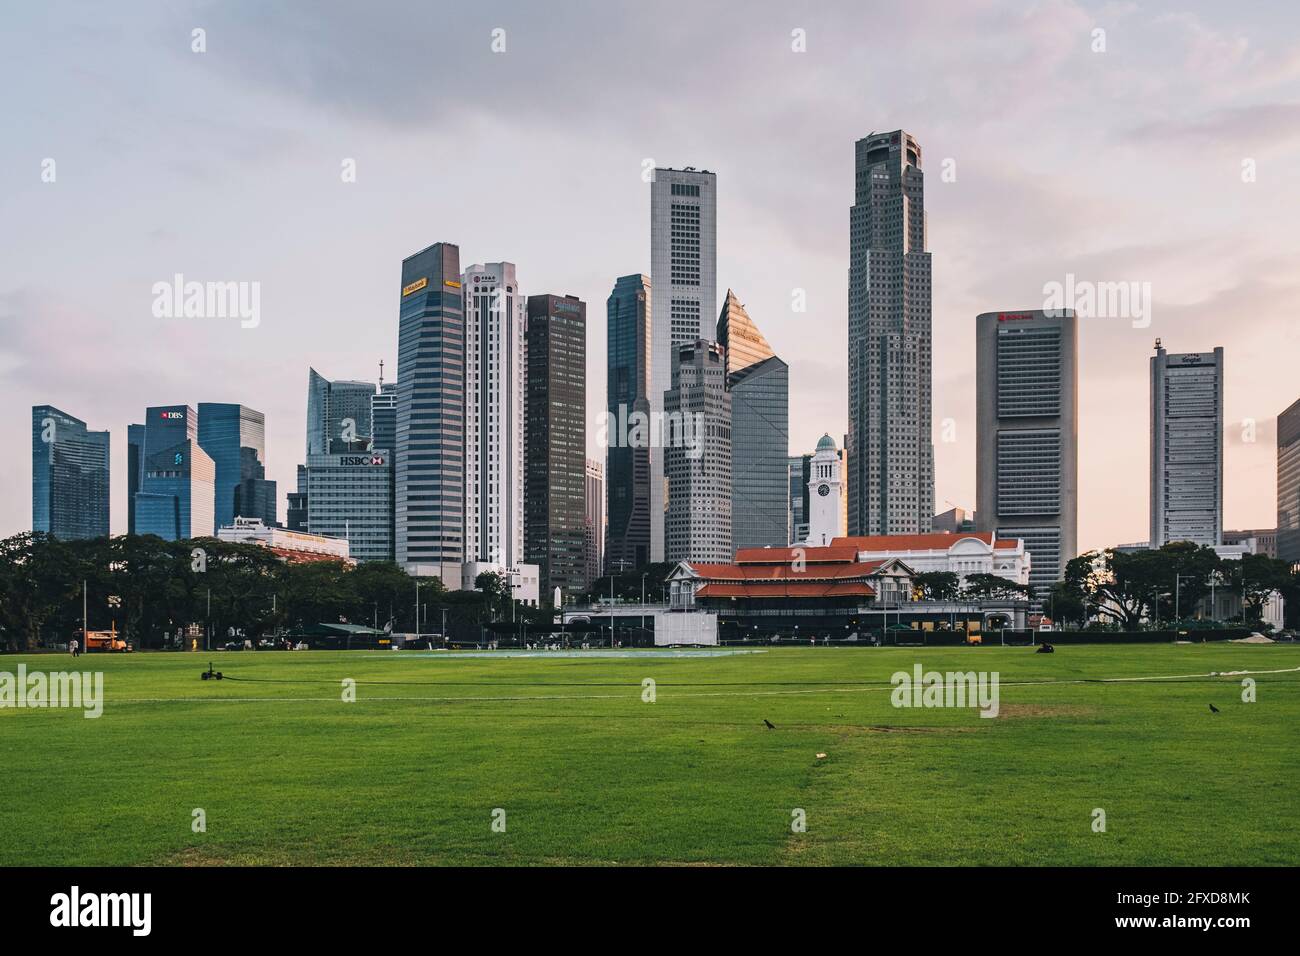 Padang playing green field with a low angle of the city skyline featuring financial district, Singapore. Stock Photo